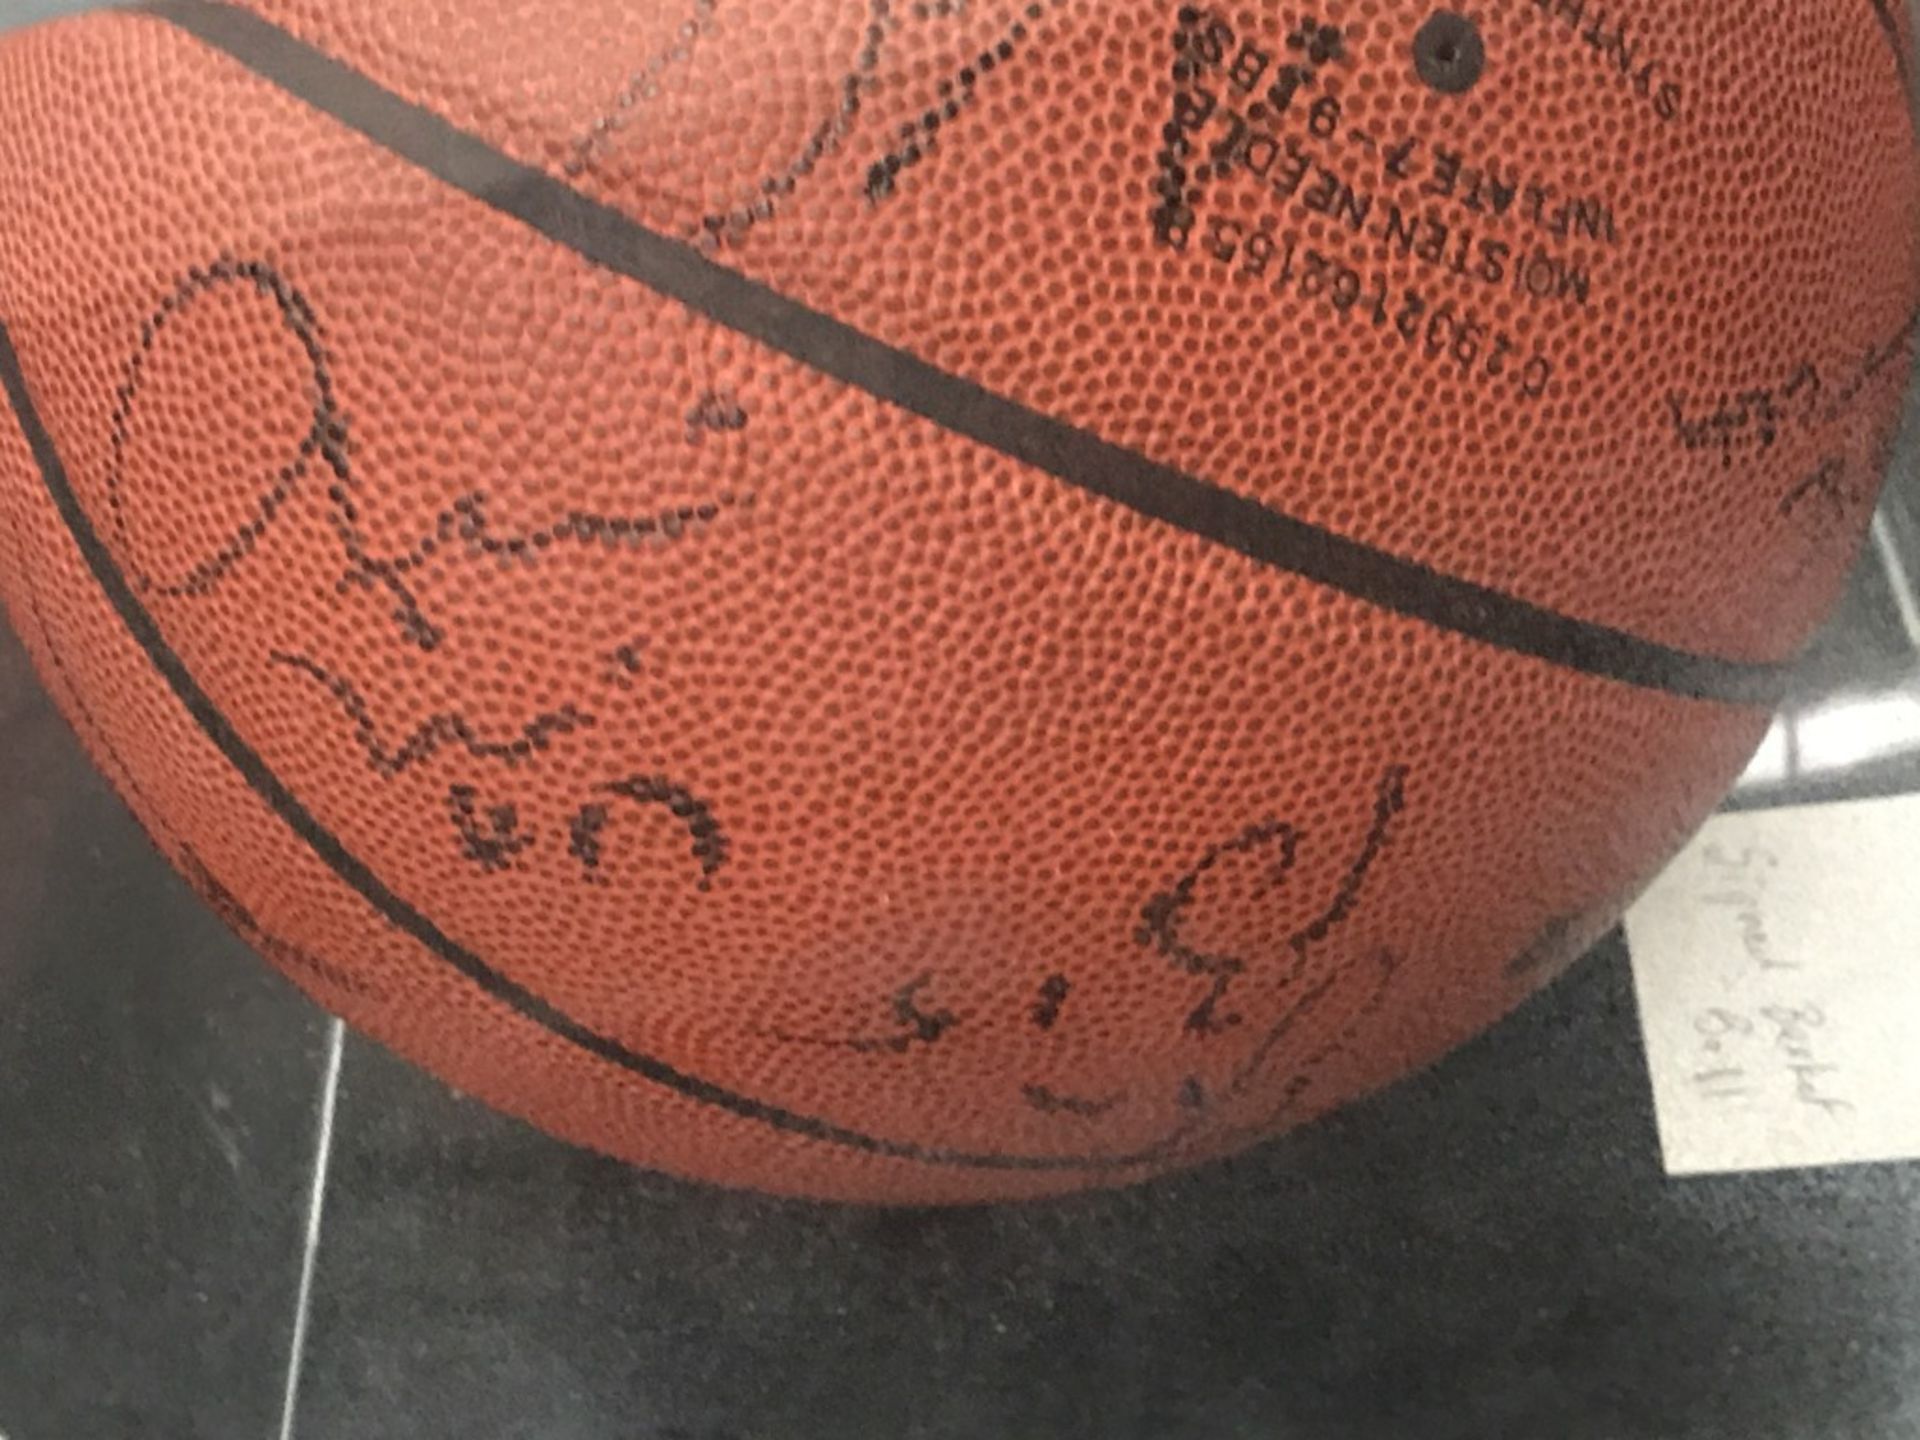 Basketball Signed by Rockets Team - Image 7 of 10